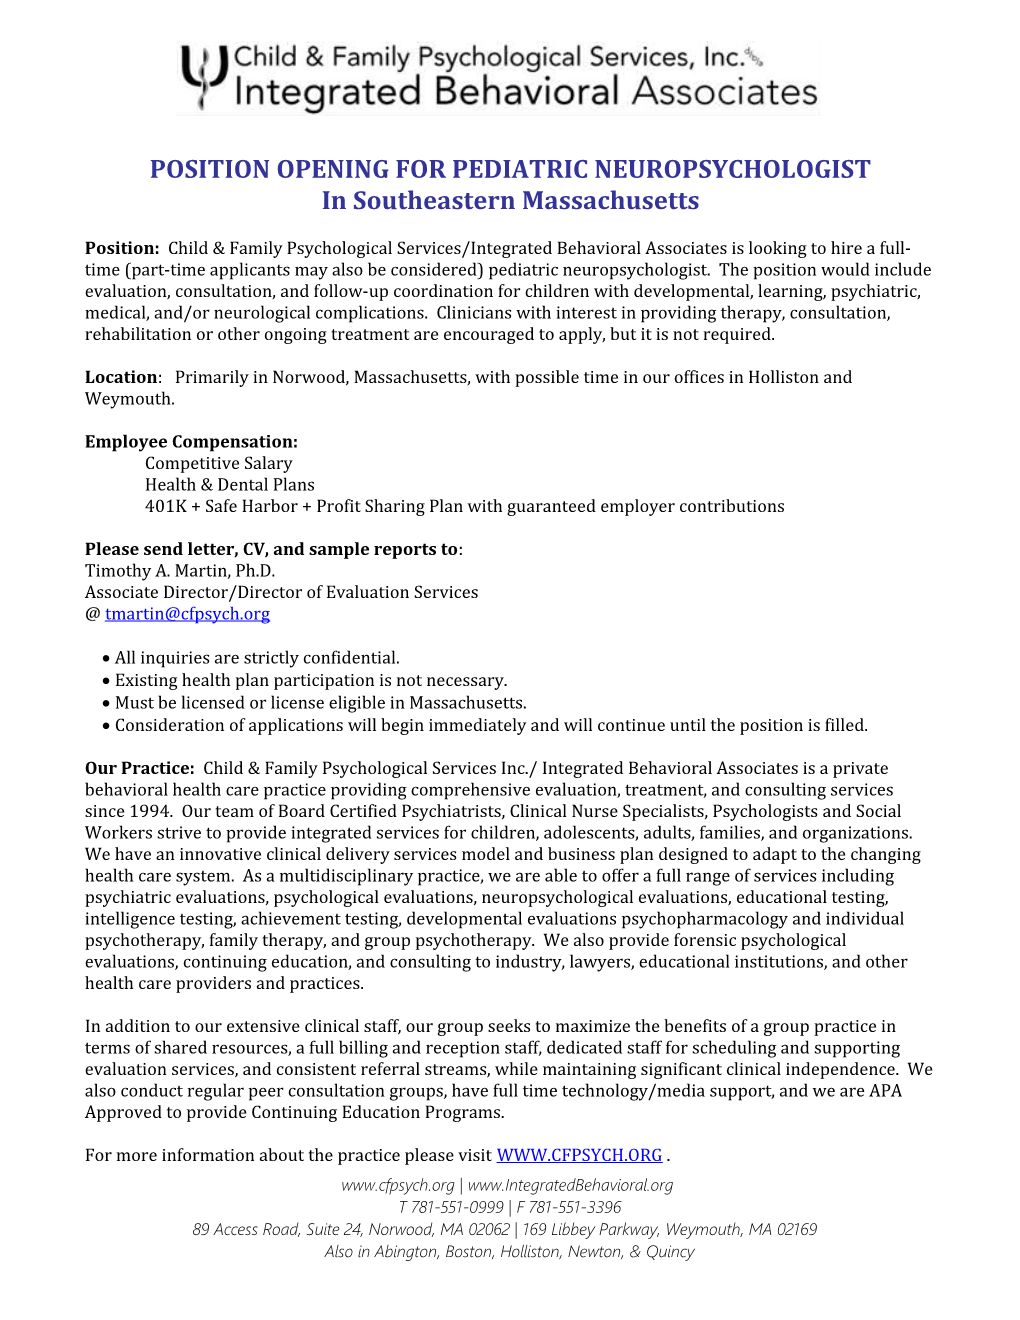 Position Opening for Pediatric Neuropsychologist